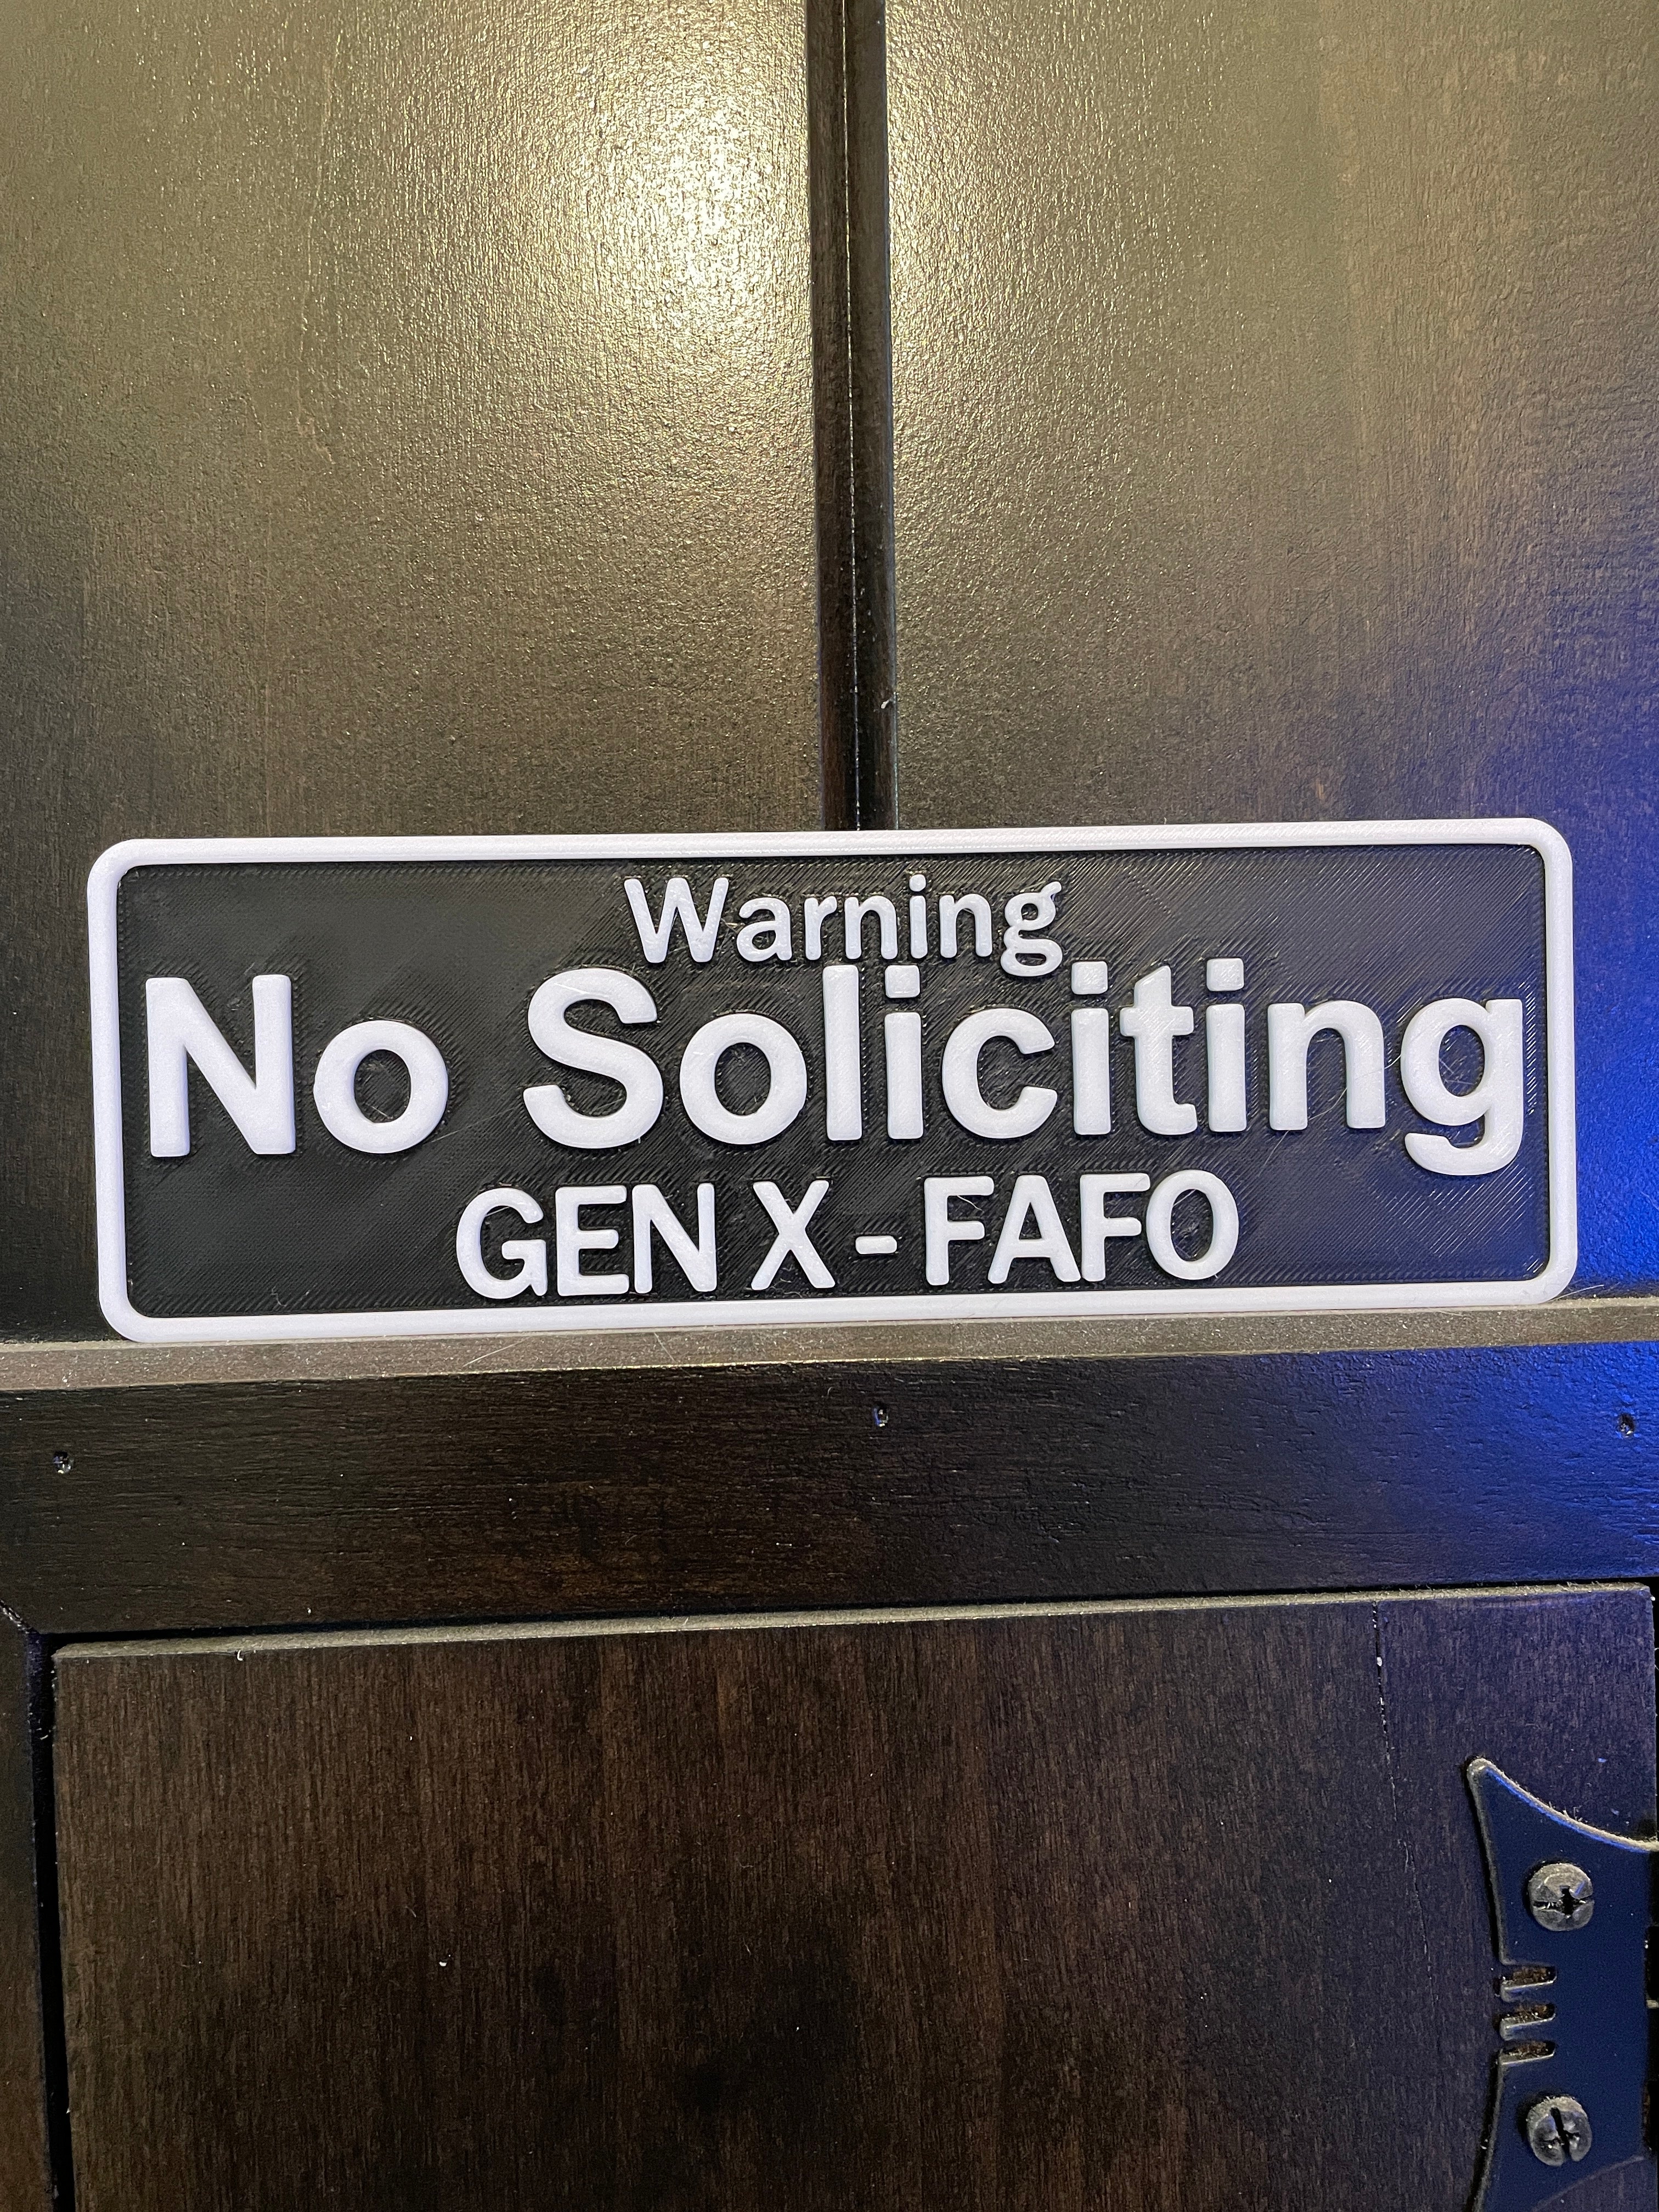 No Soliciting Gen X - FAFO custom sign. Indoor or outdoor usage